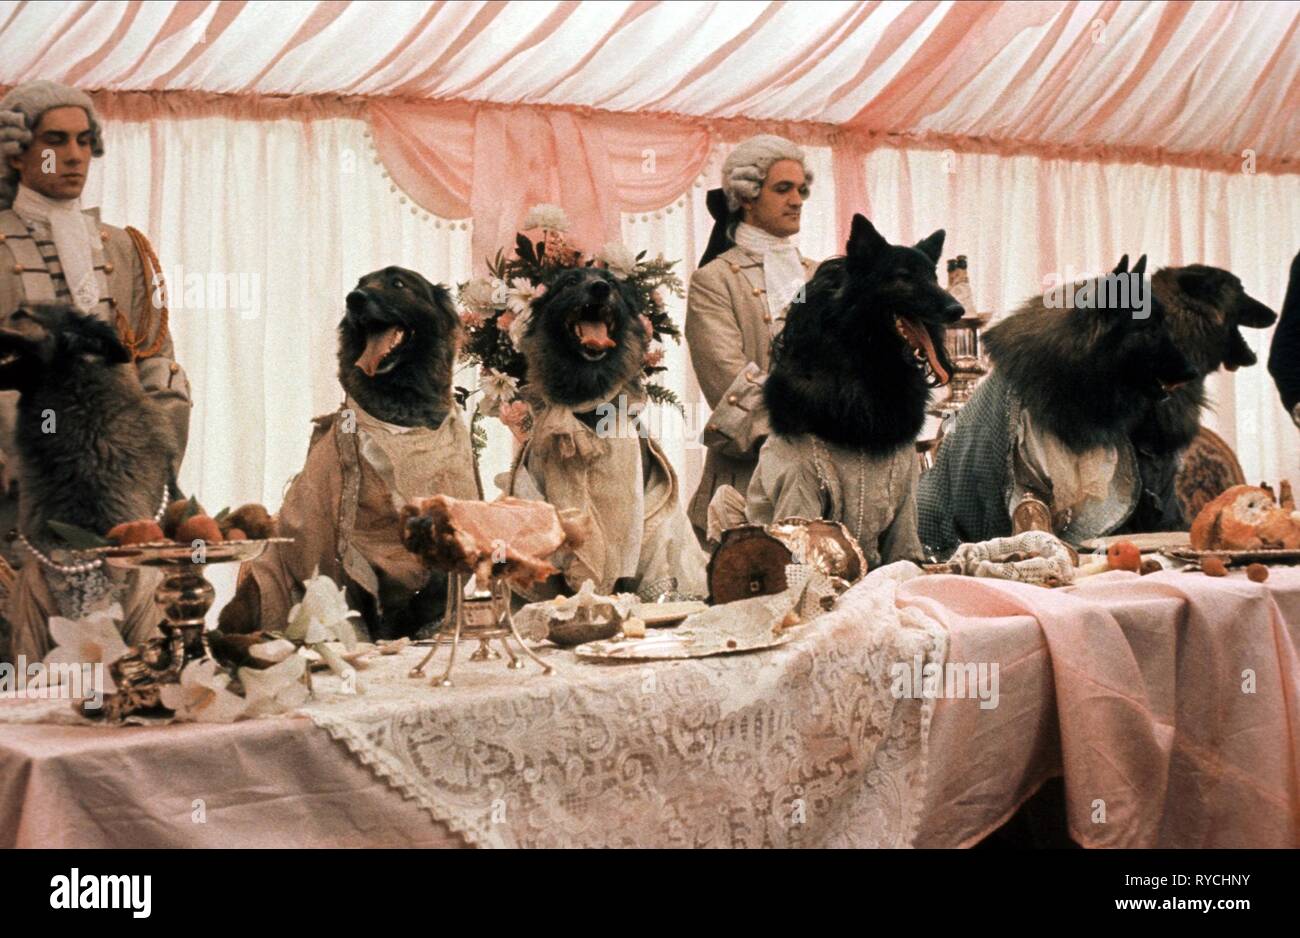 MOVIE SCENE, THE COMPANY OF WOLVES, 1984 Stock Photo